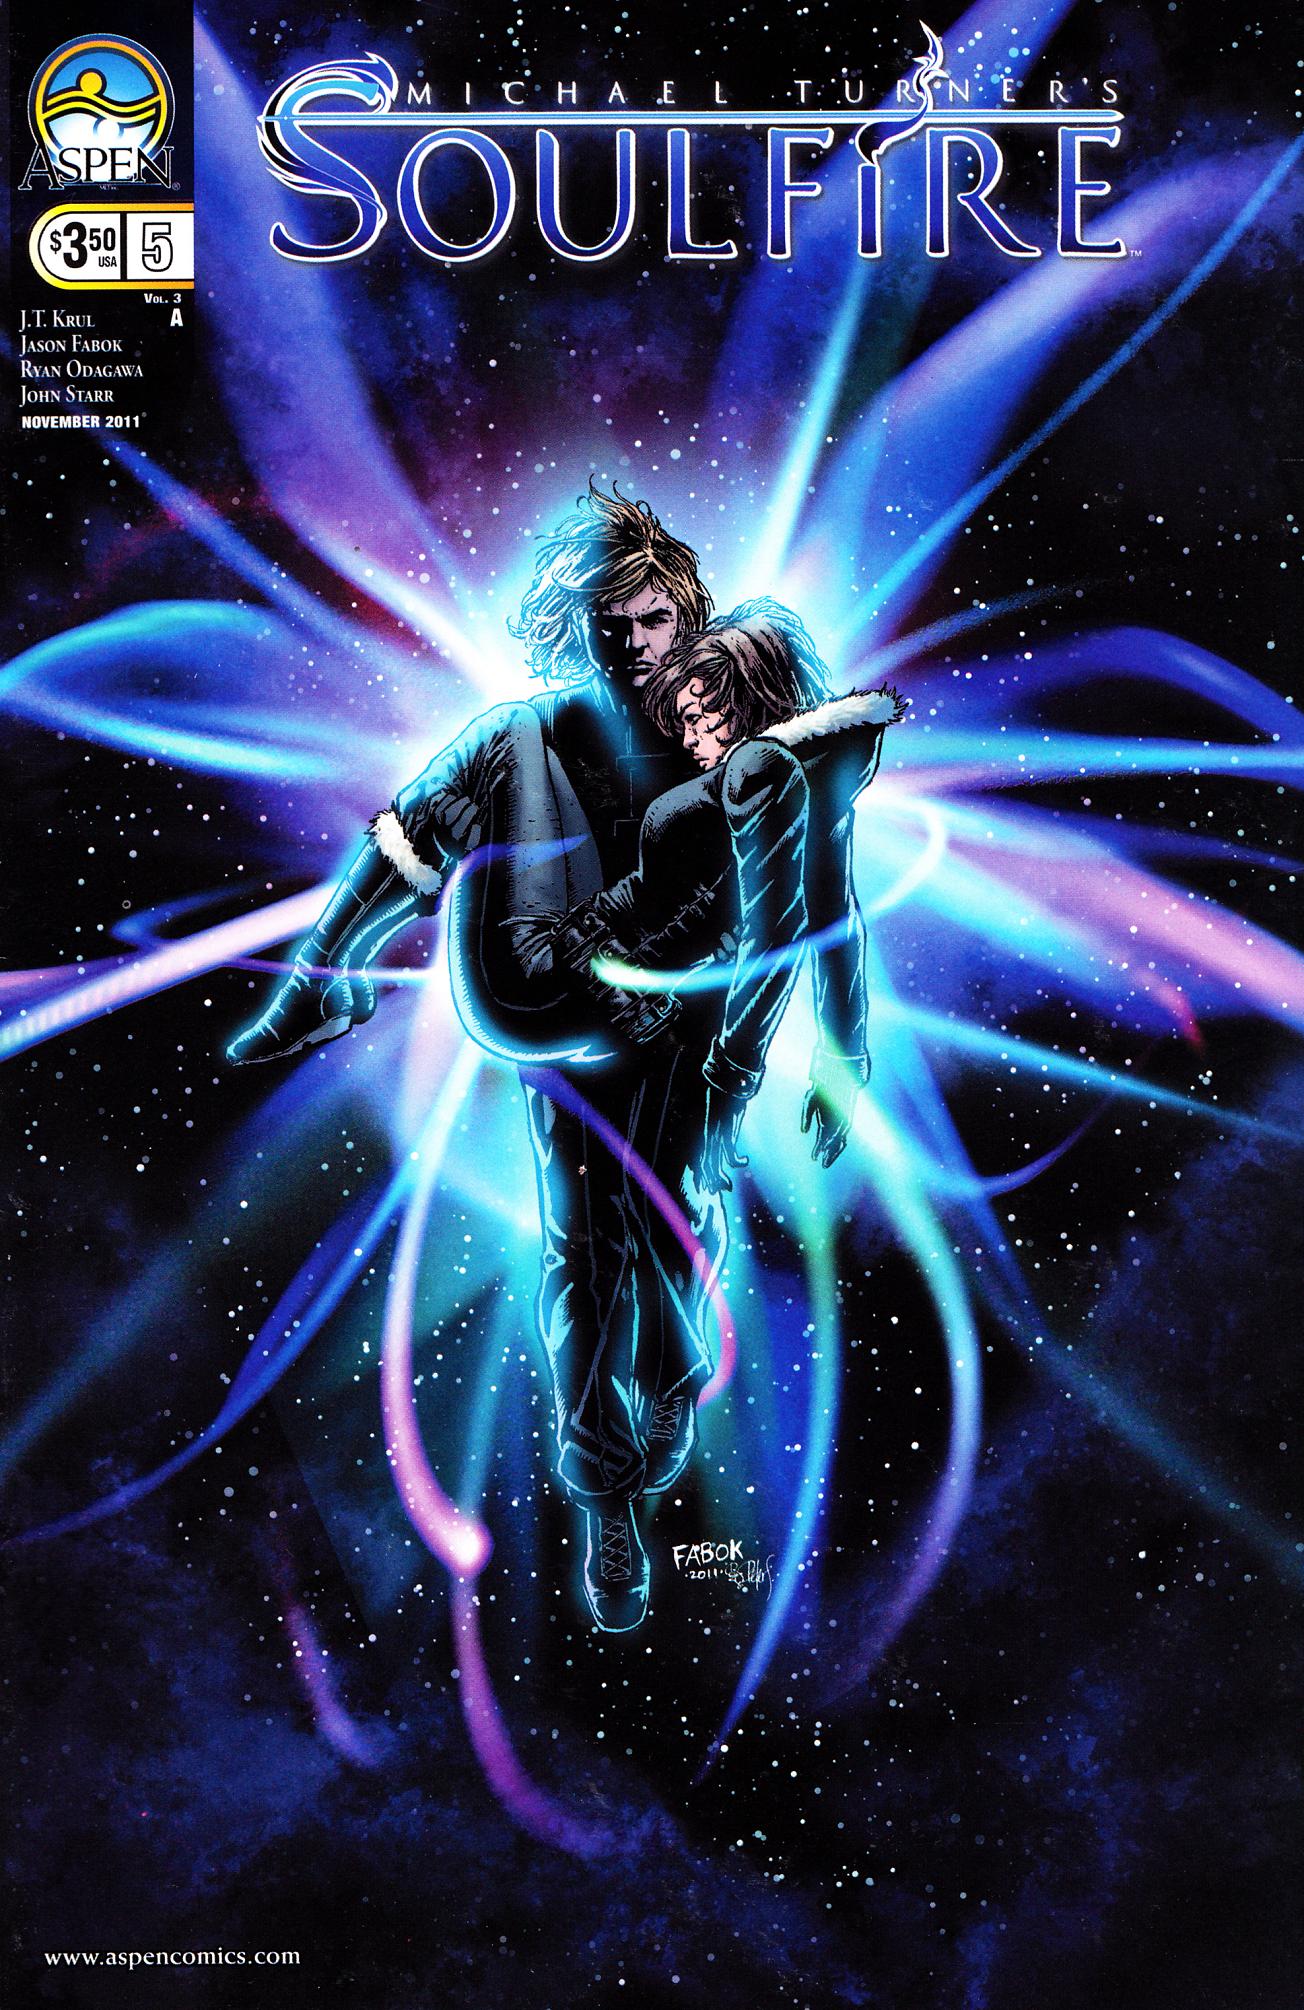 Read online Michael Turner's Soulfire (2011) comic -  Issue #5 - 1